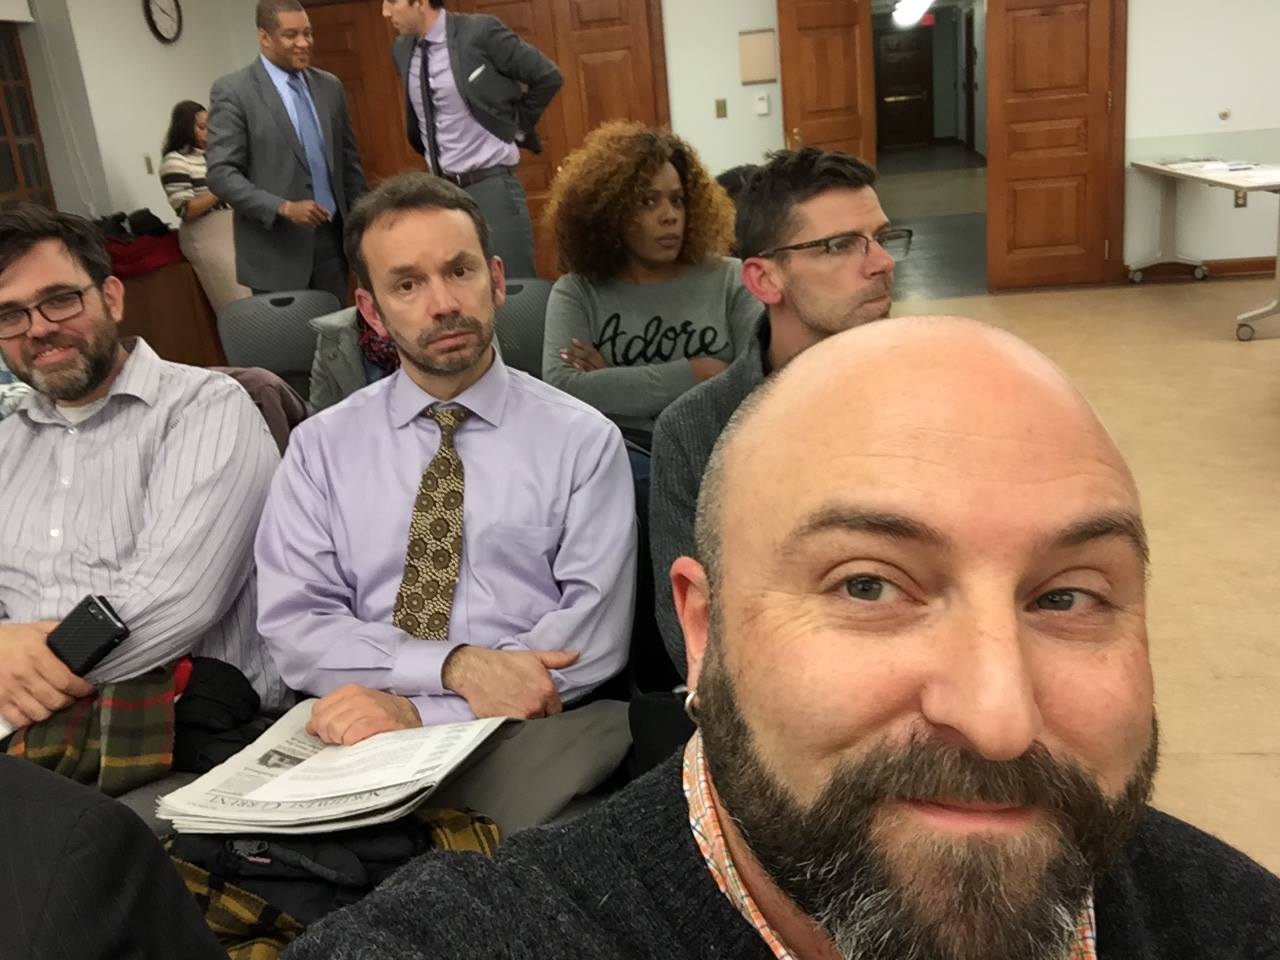   The ANC 4C meeting gets a selfie with Drew.  